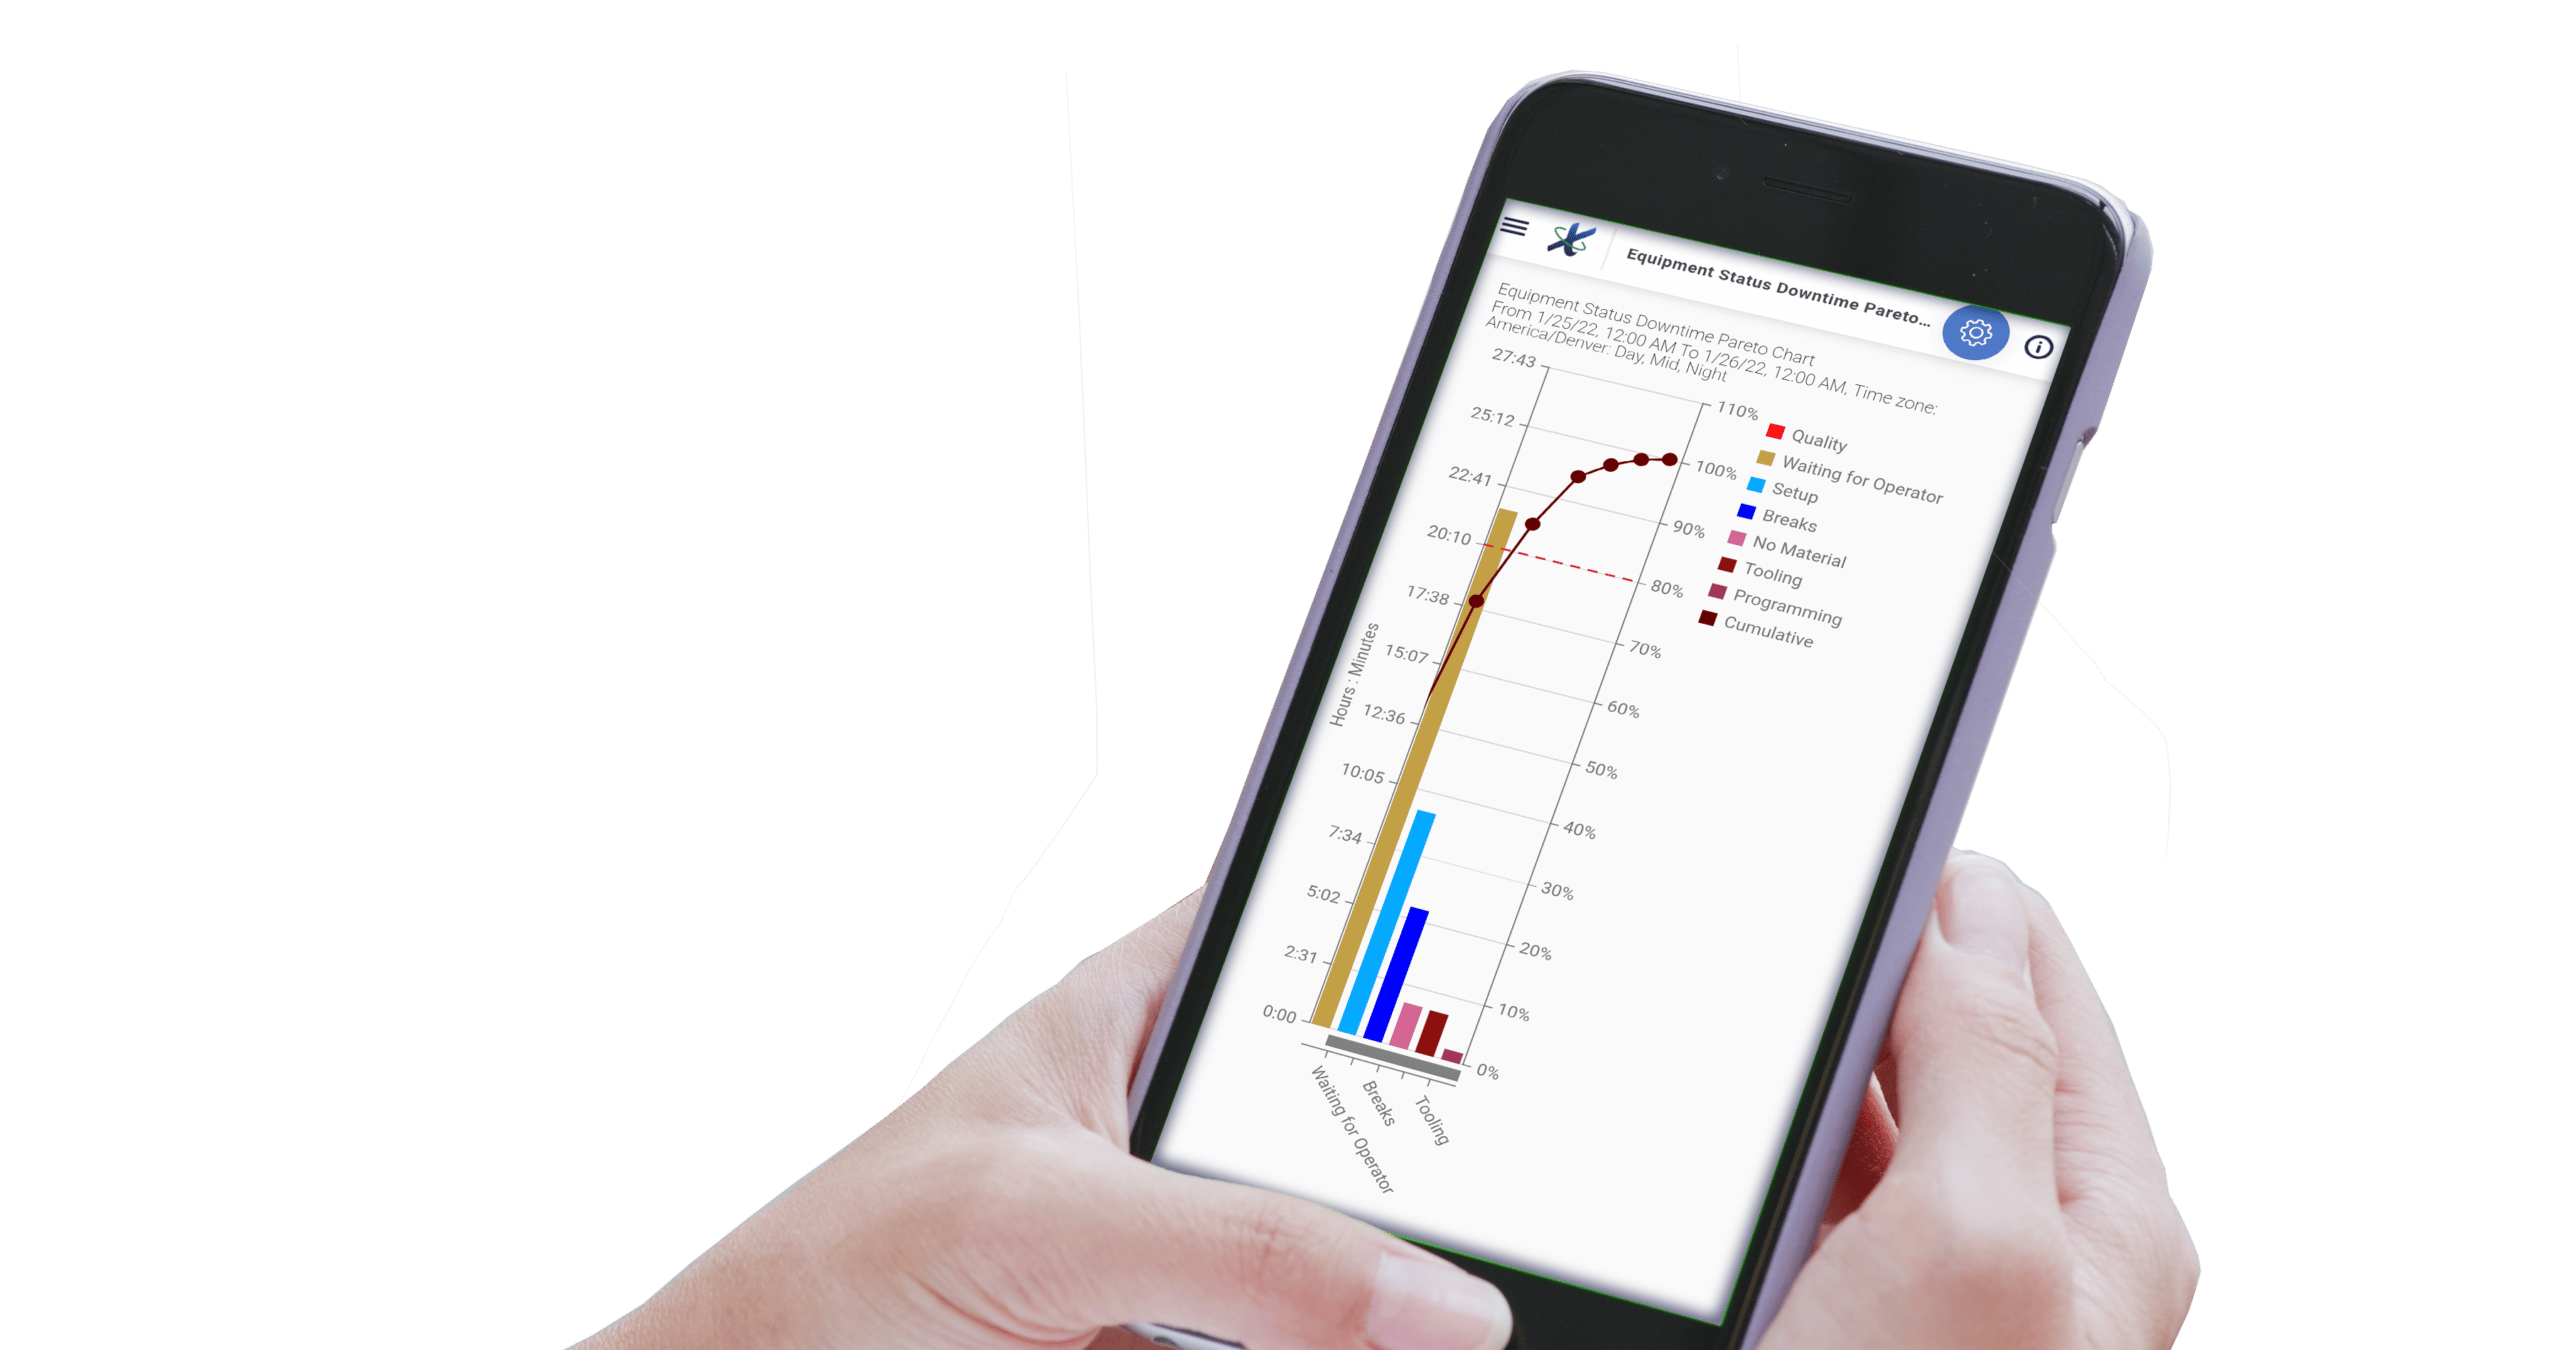 Close up of a smartphone being held in someone's hands. The phone's screen displays the Equipment Status Downtime graph from DataXchange's mobile app.